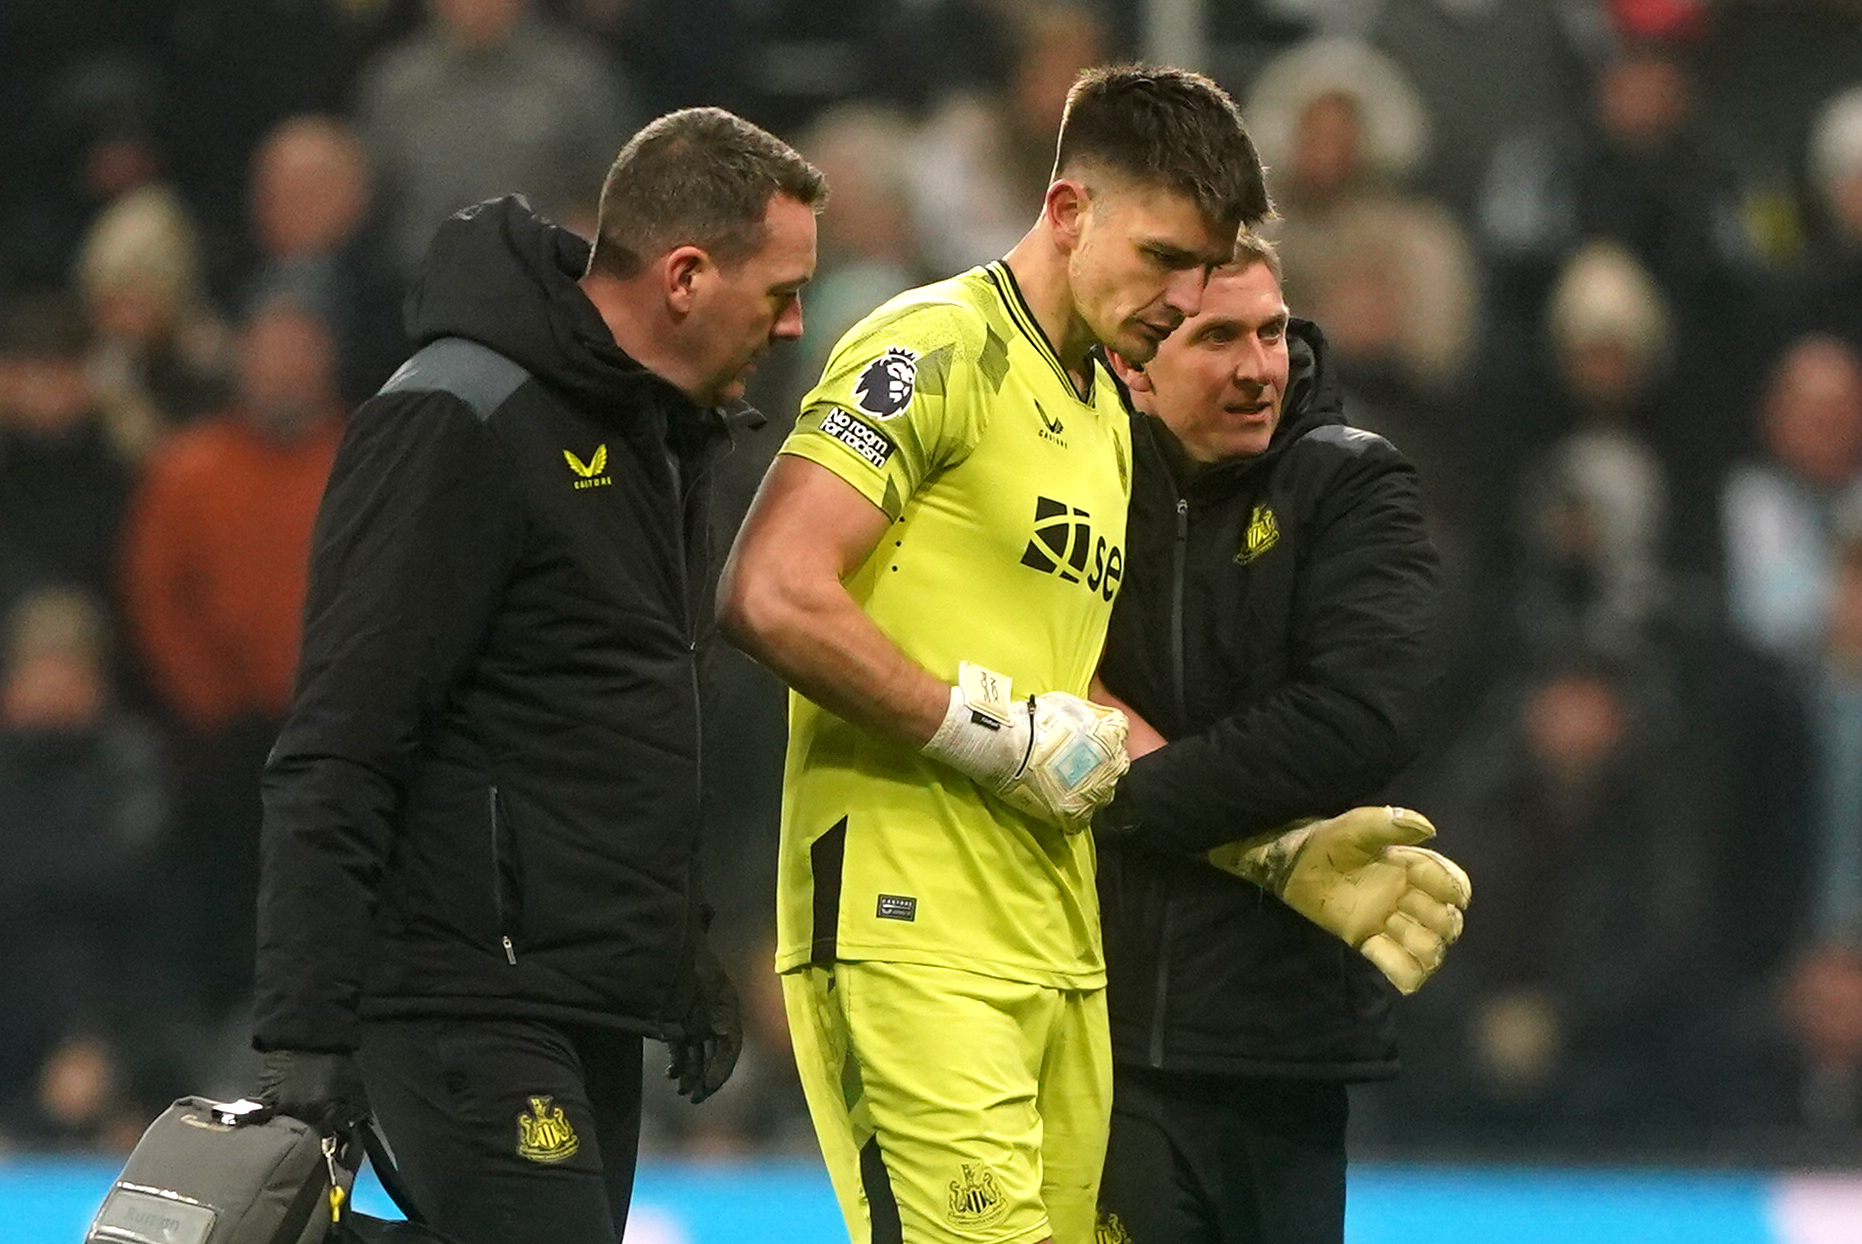 Newcastle: Nick Pope injury update after Manchester United win